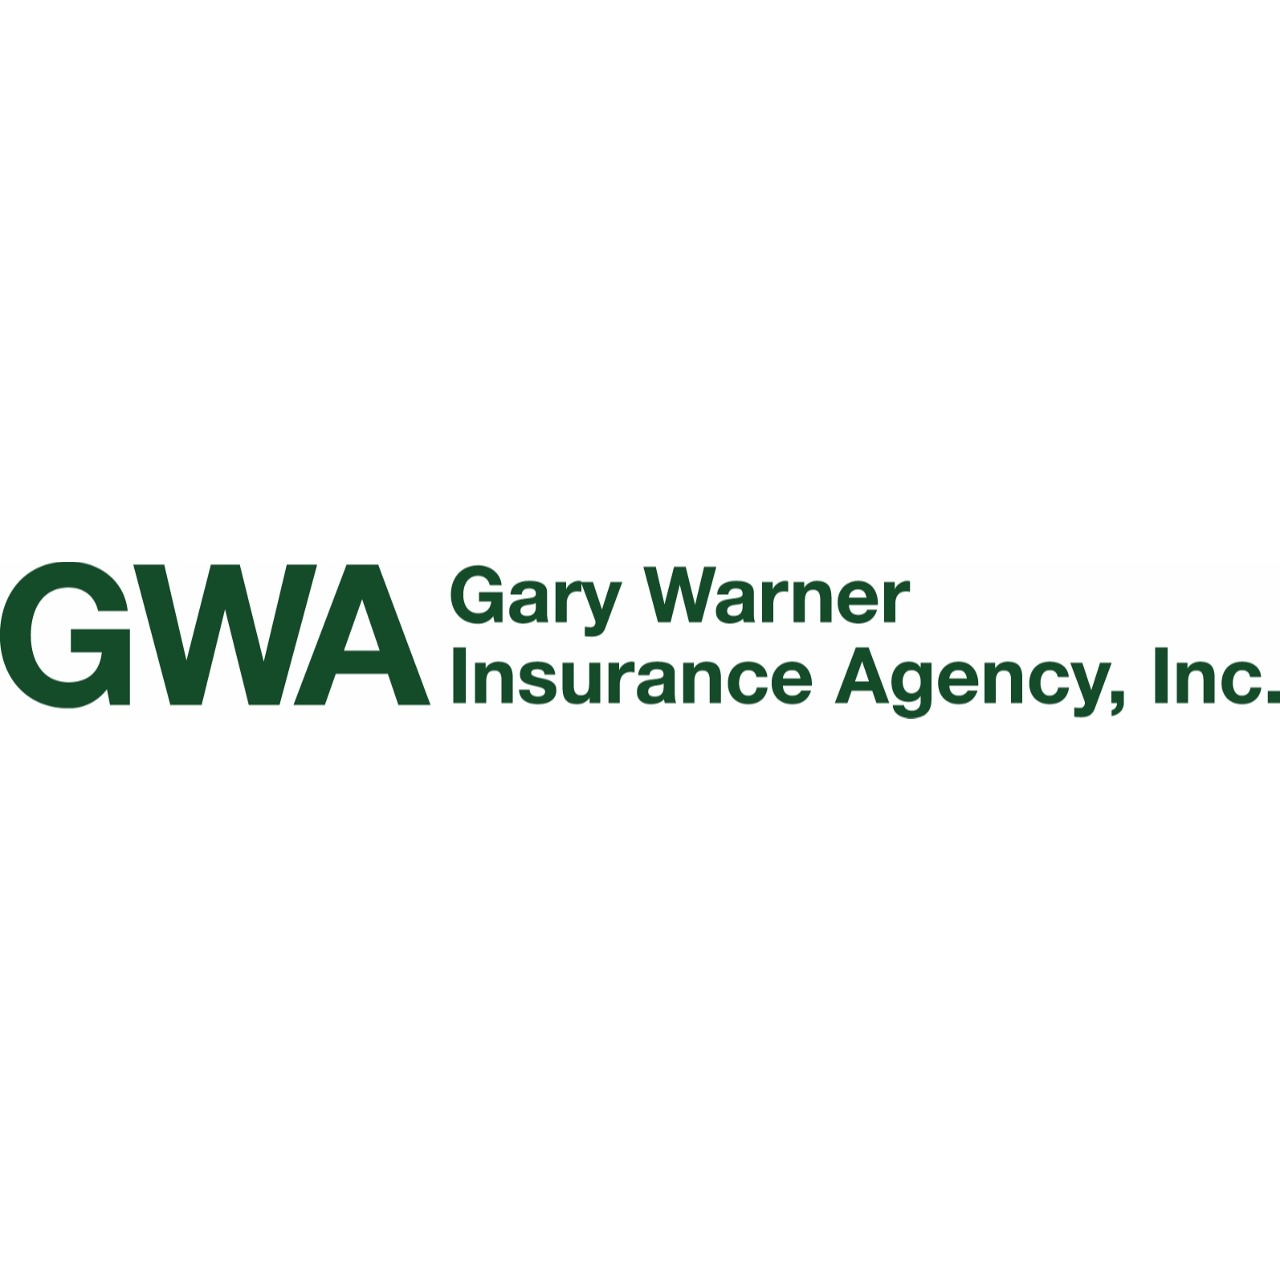 Ethan Gregory Winser, Insurance Agent